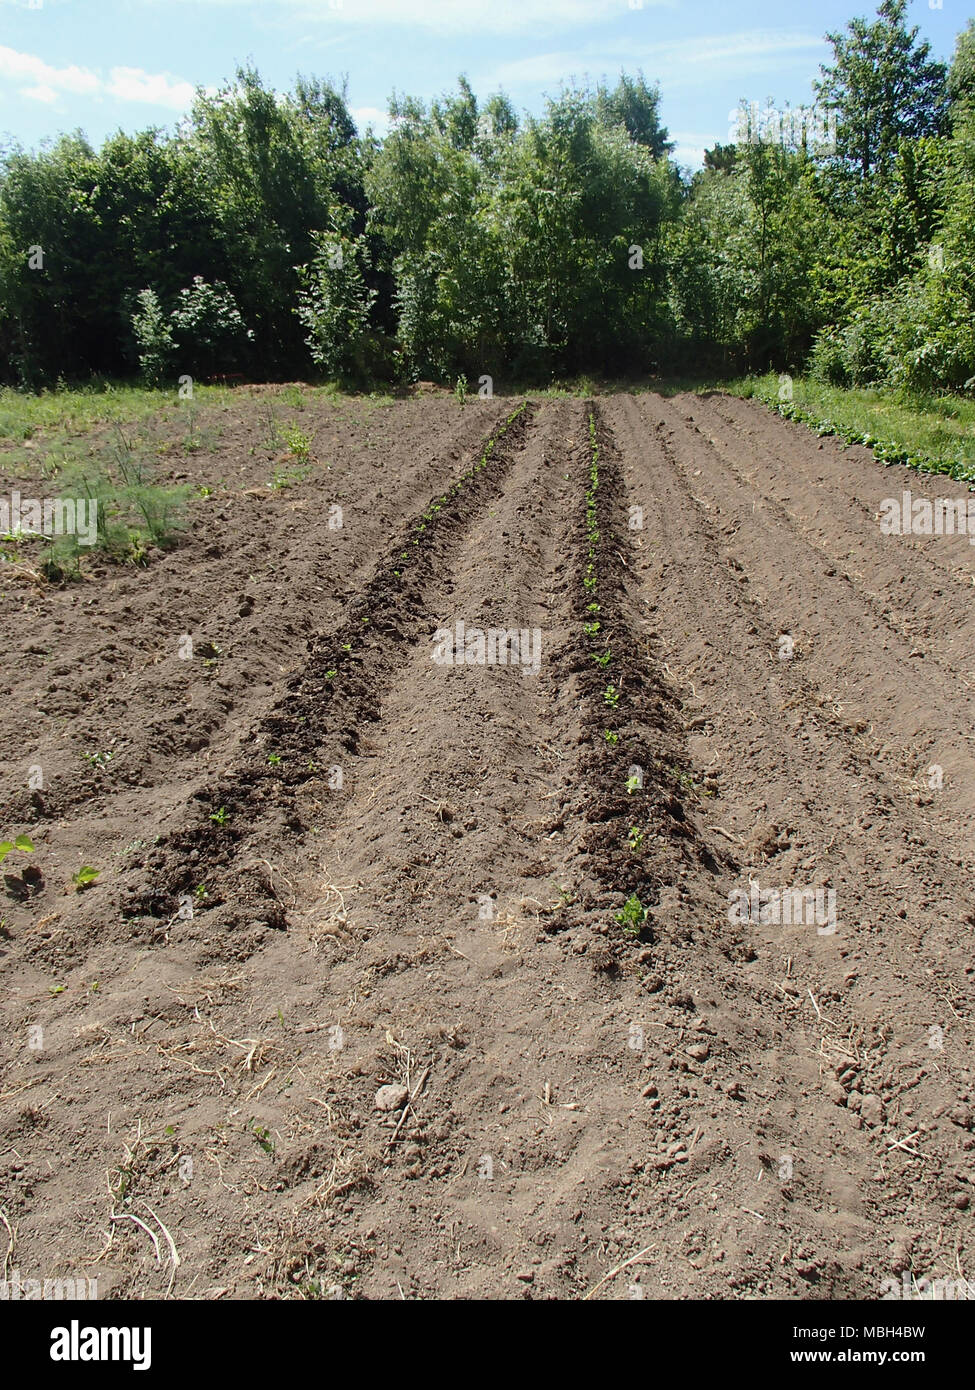 New Seedlings in a Cultivated Organic Land Stock Photo